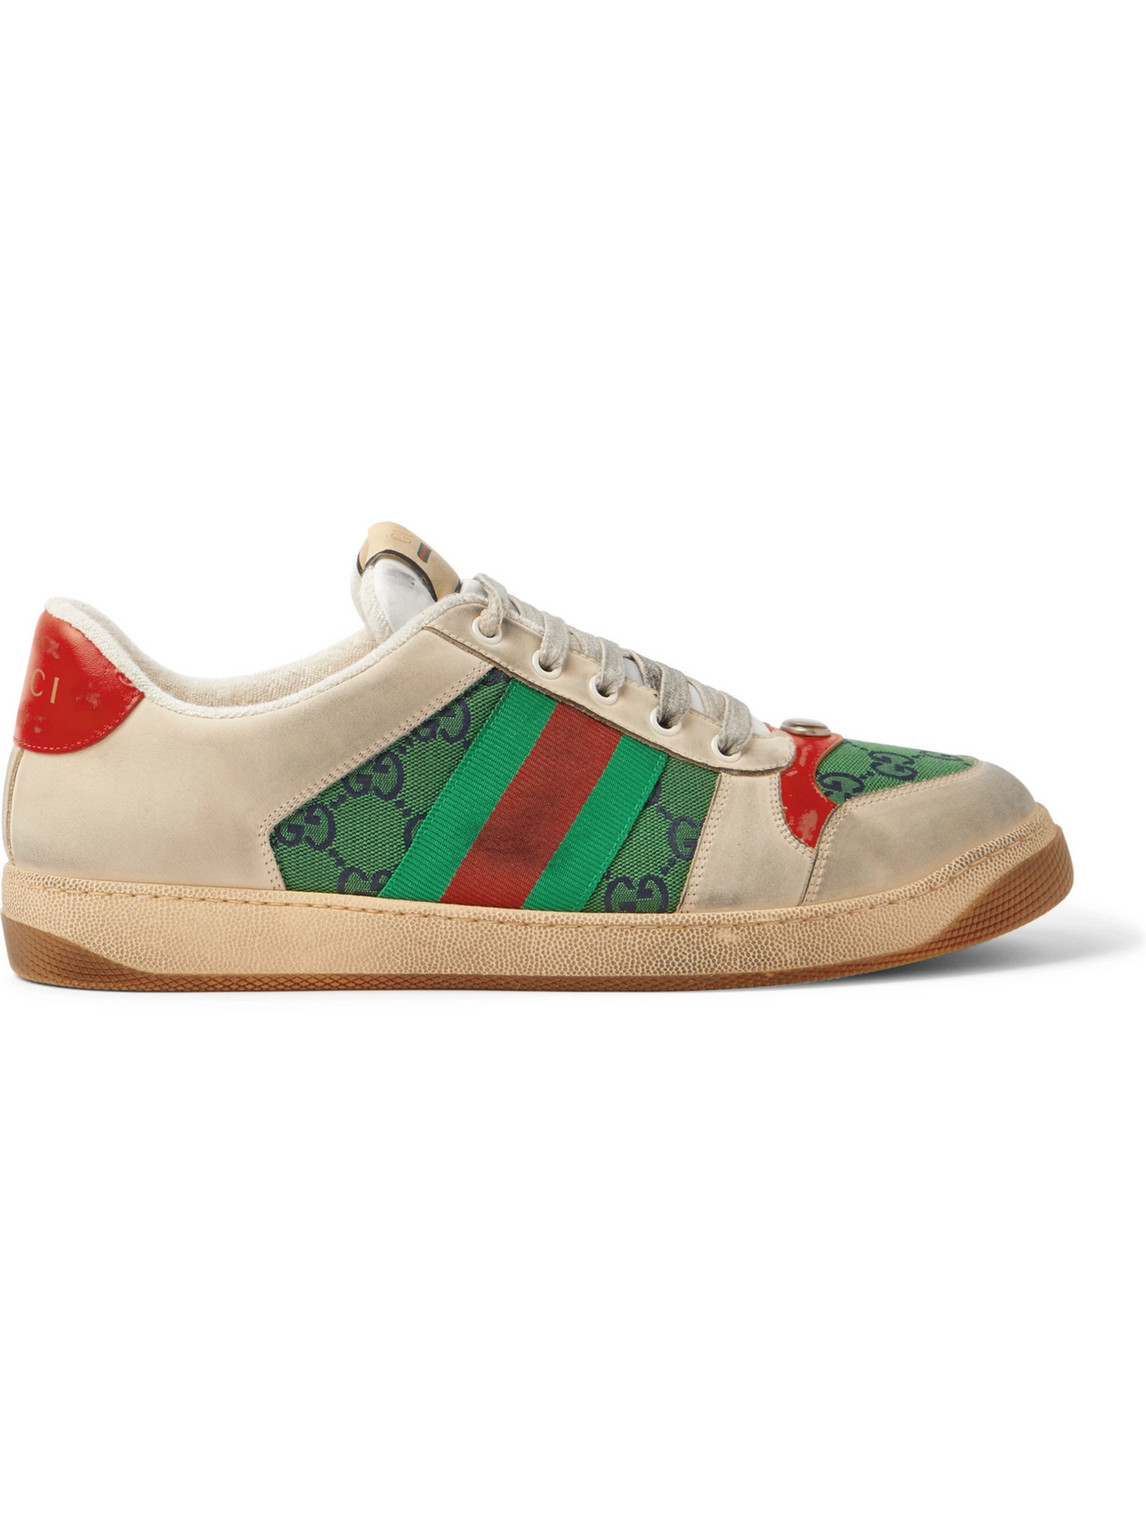 Screener GG Webbing-Trimmed Distressed Leather and Printed Canvas Sneakers